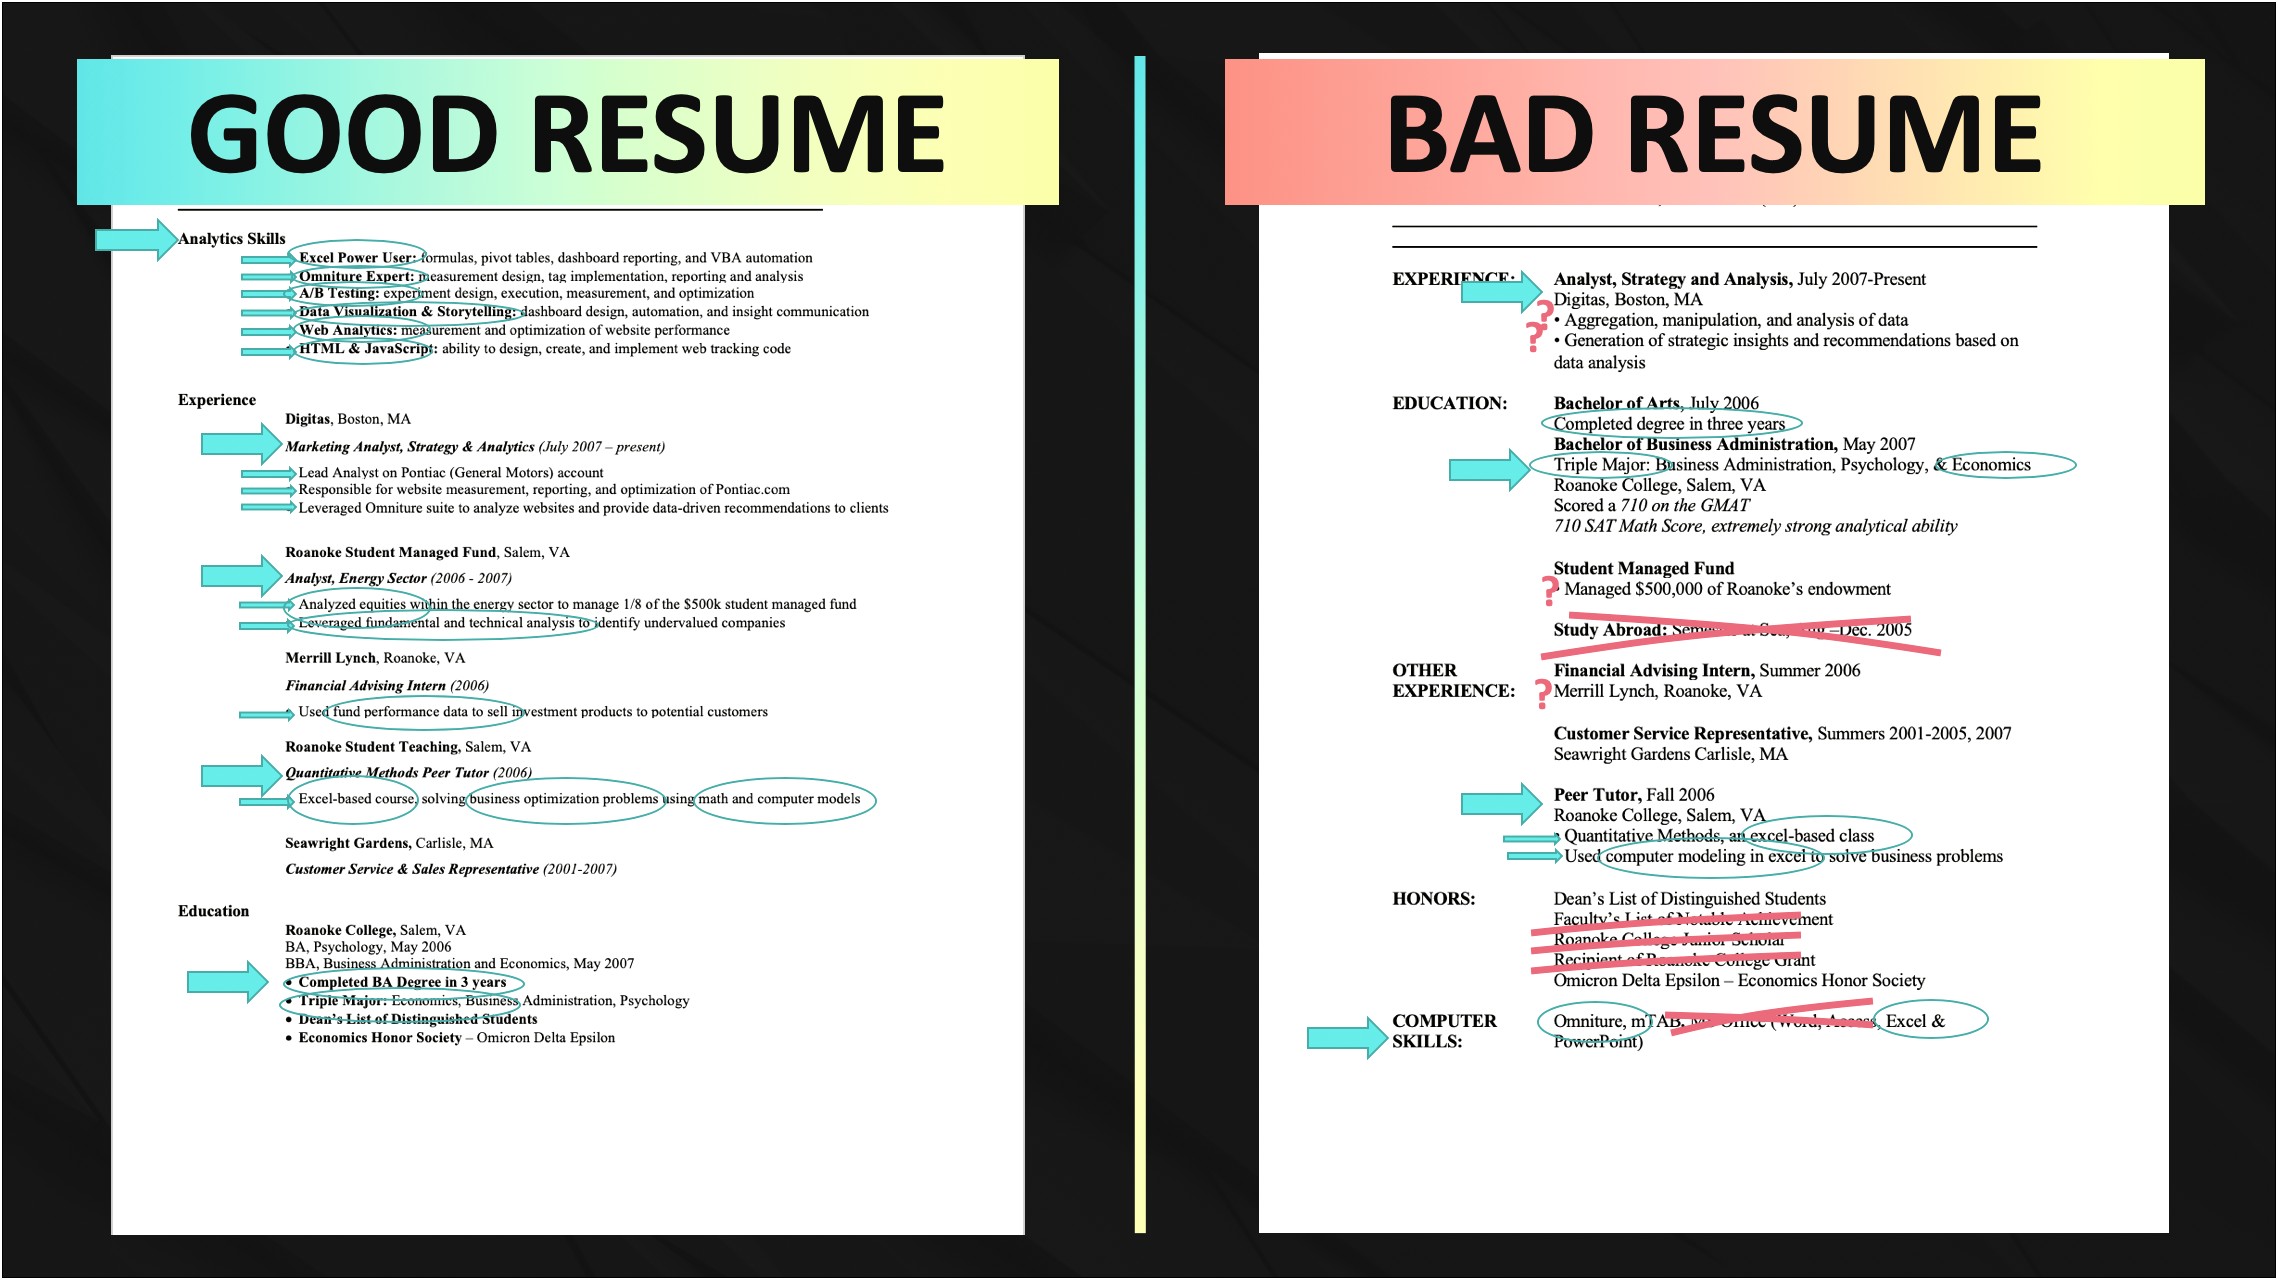 Example Of Bad Resume For Students